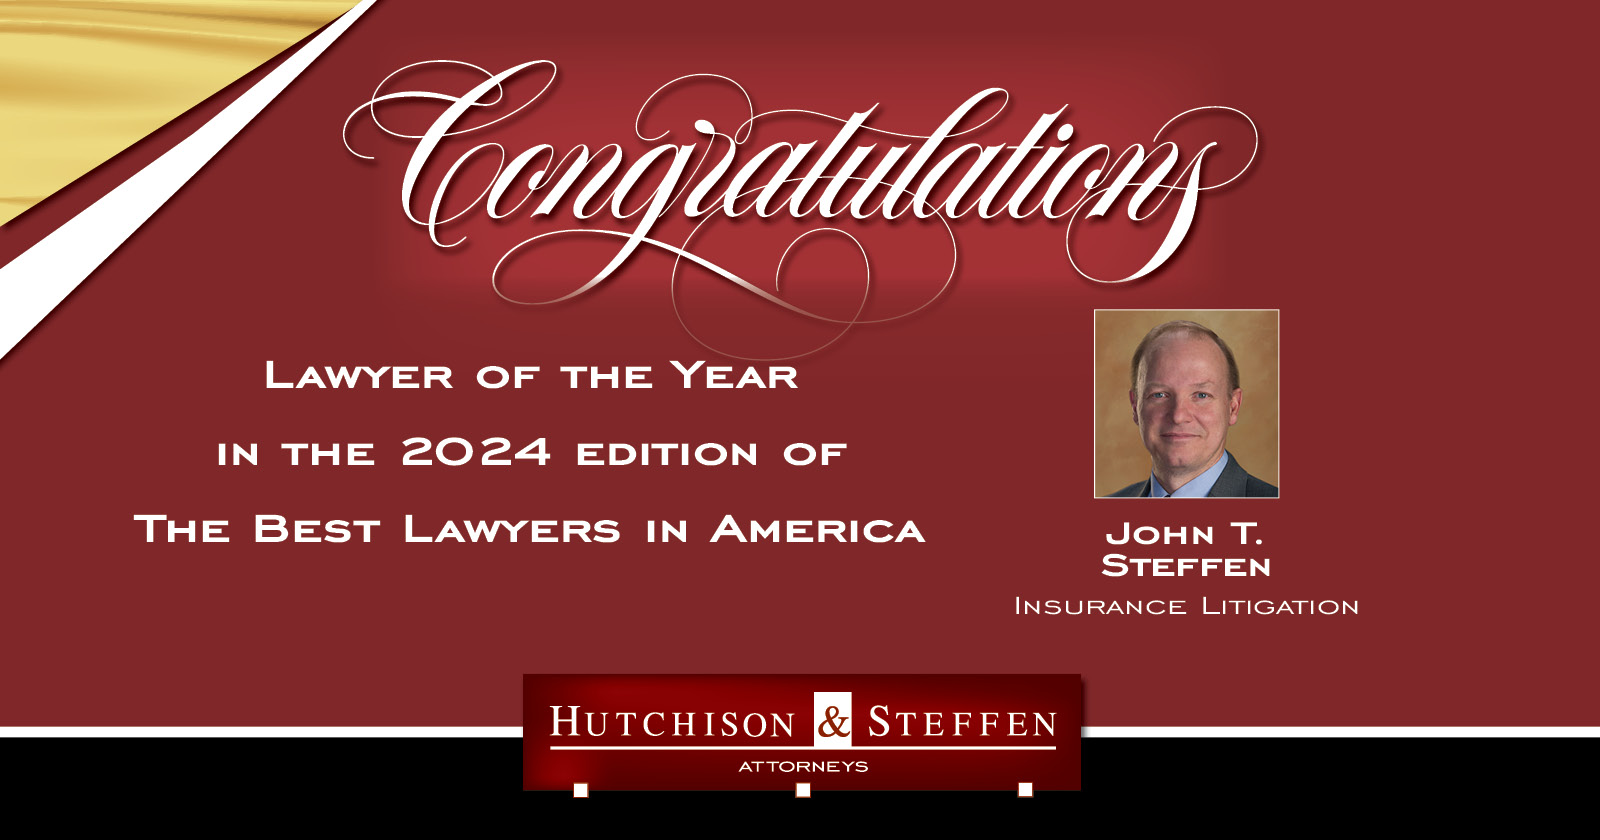 John T. Steffen Named 2024 Lawyer of the Year